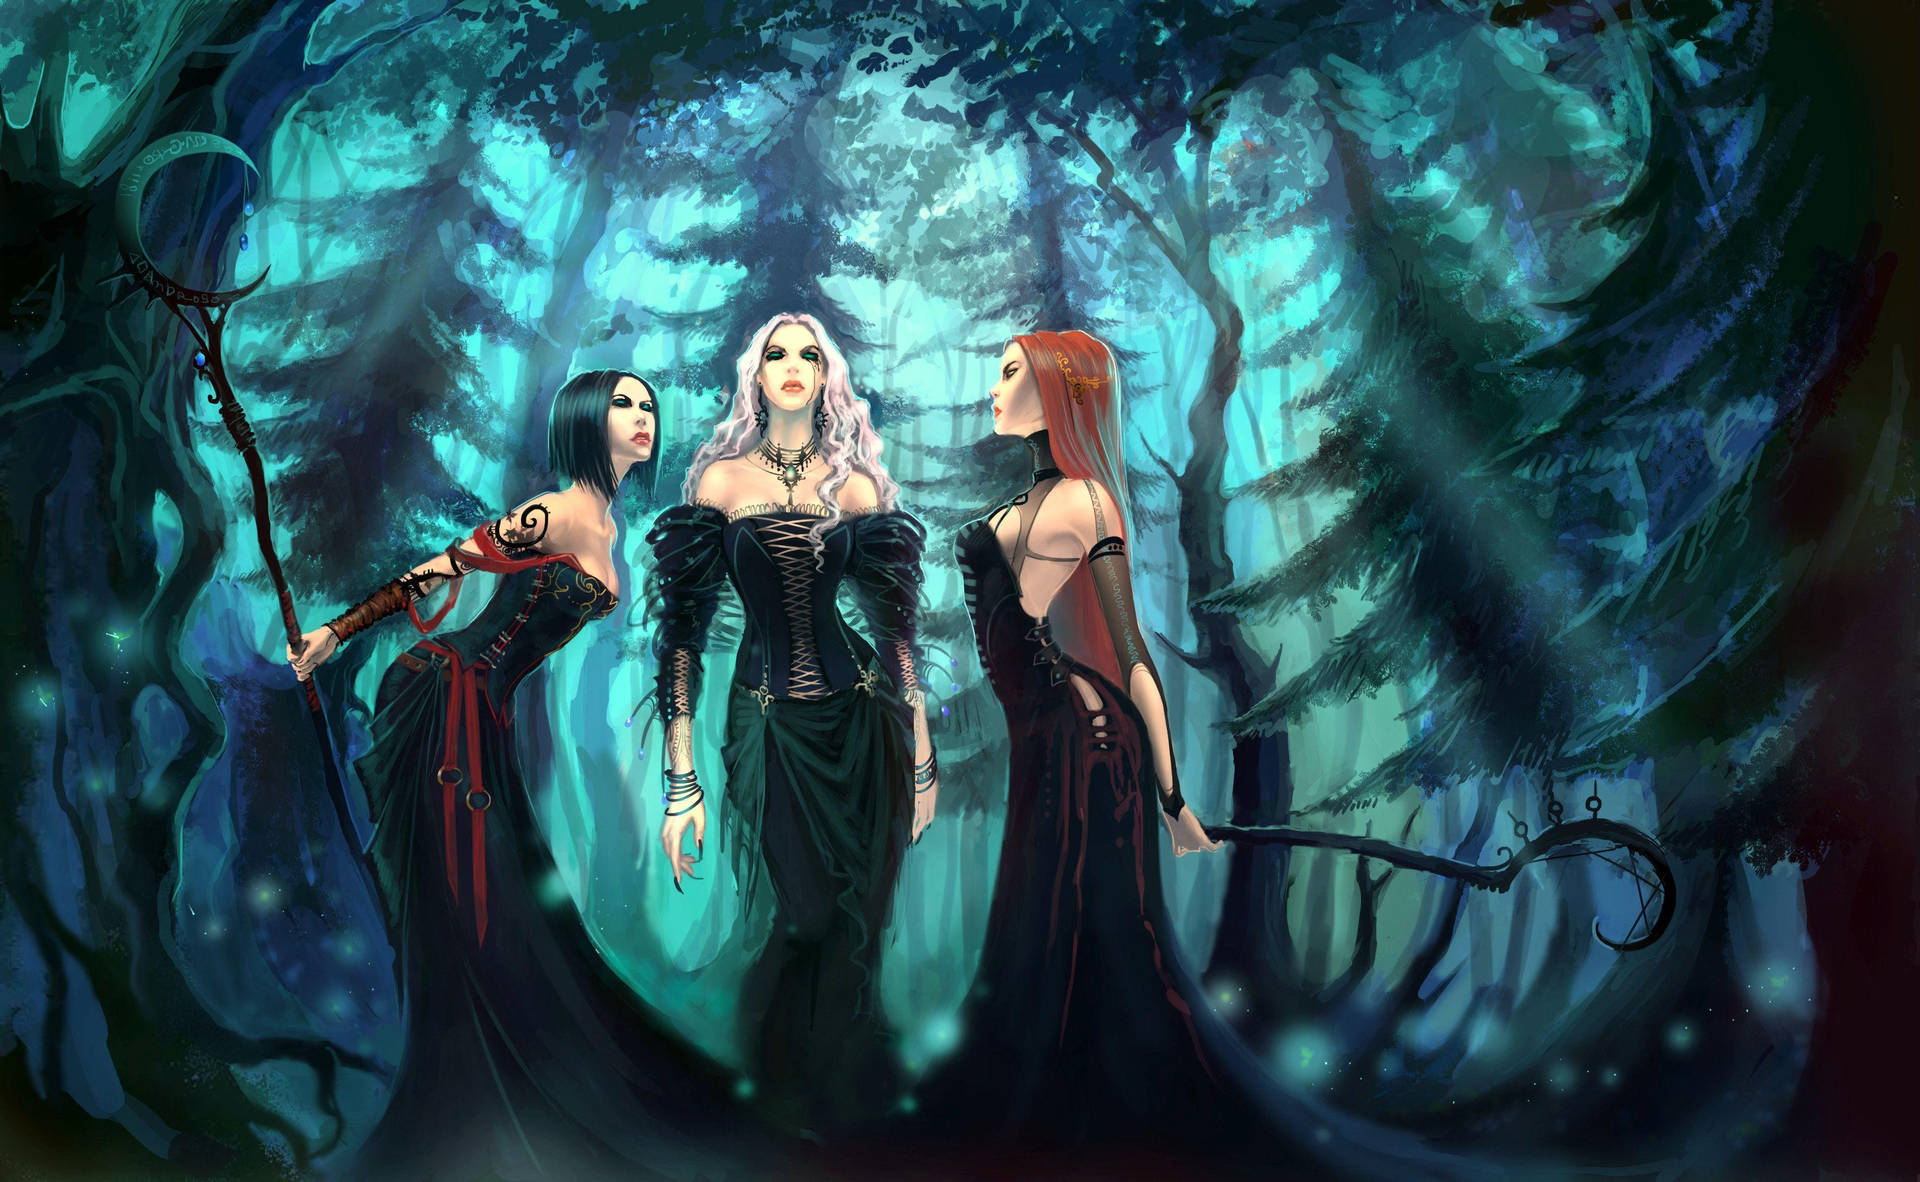 Witches In Magical Forest Wallpaper